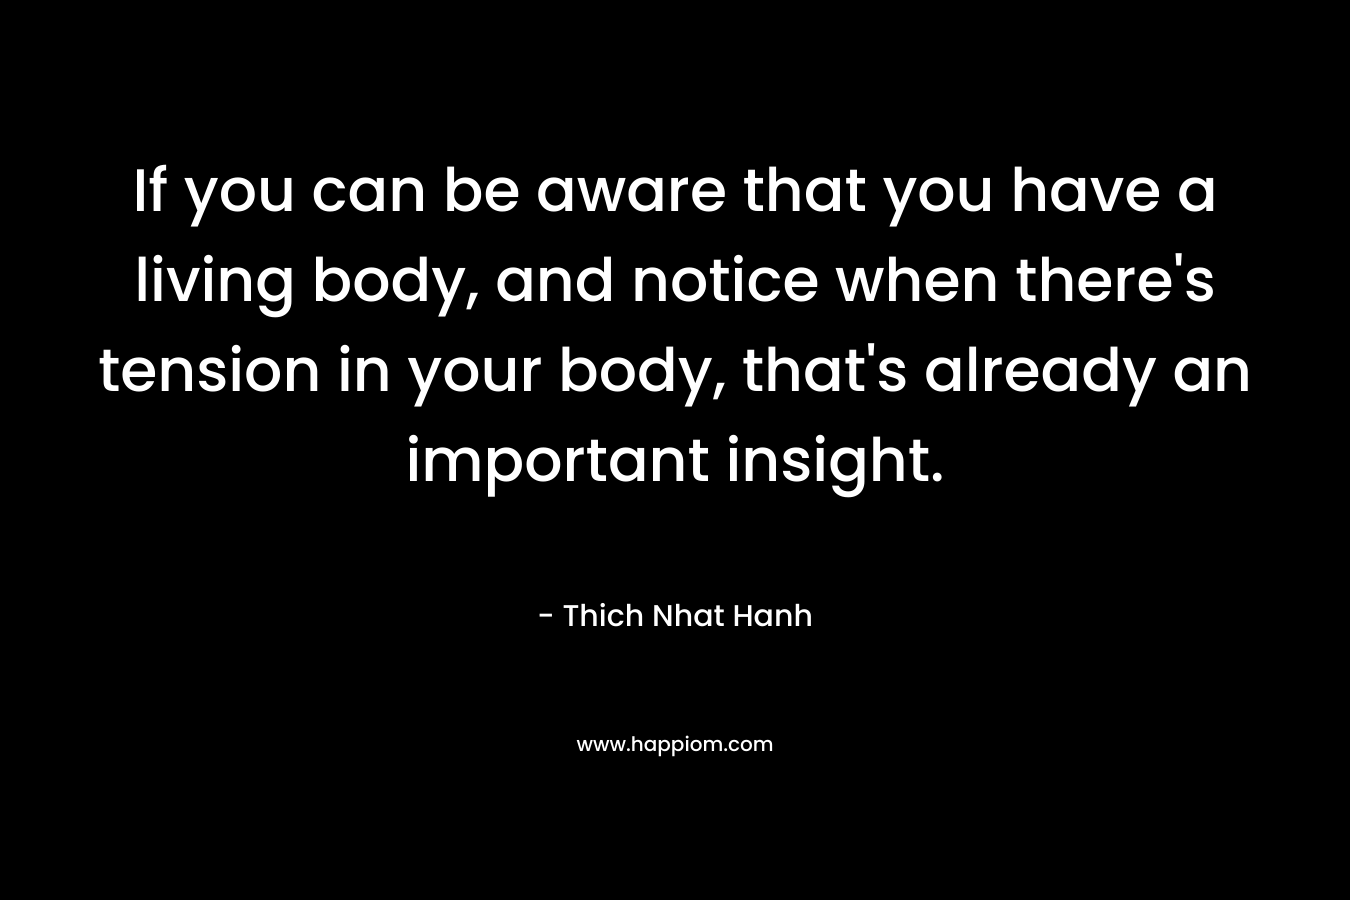 If you can be aware that you have a living body, and notice when there's tension in your body, that's already an important insight.